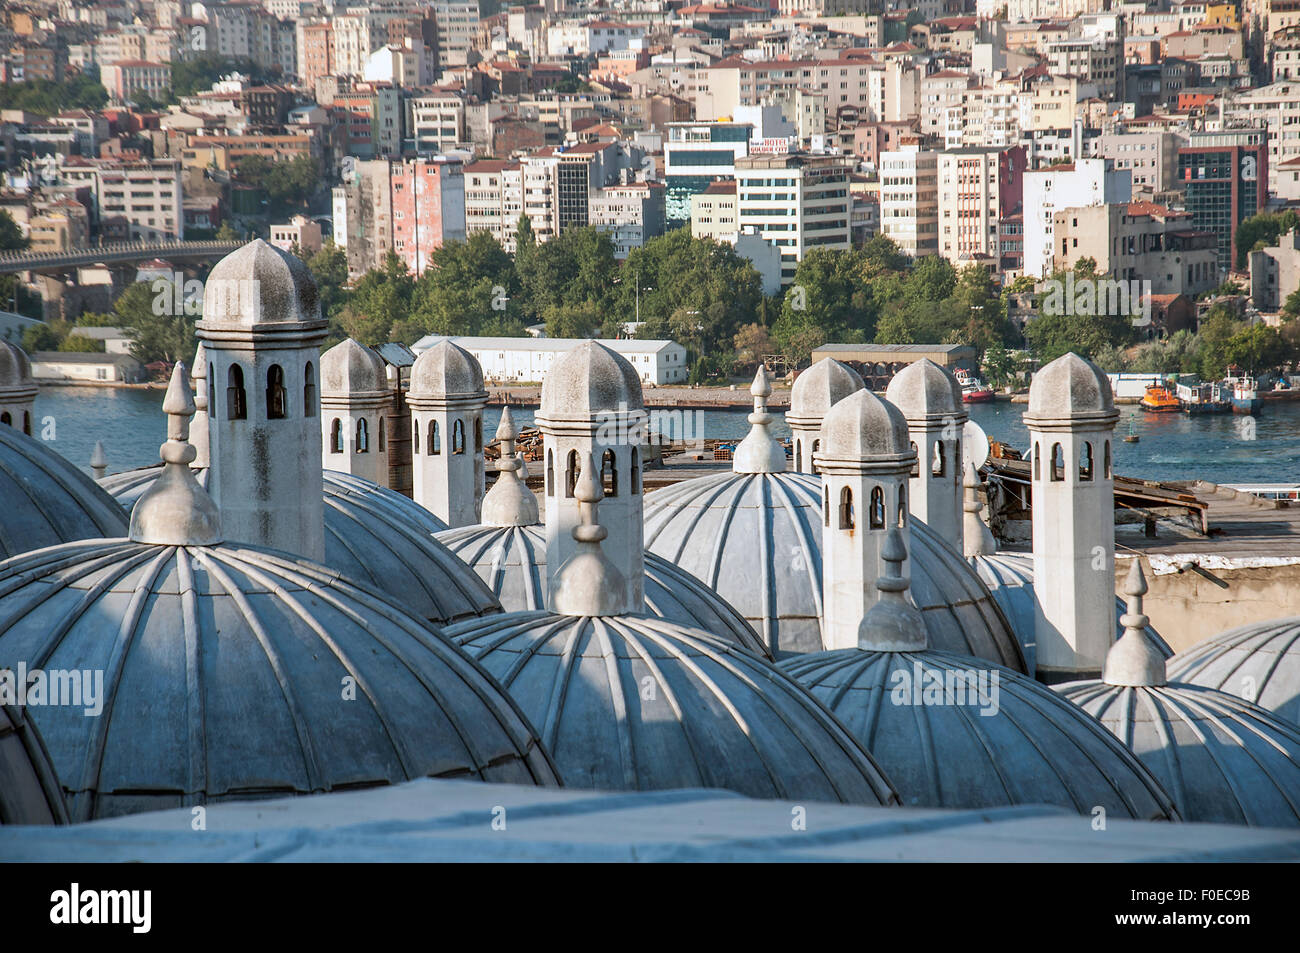 View across the domes of the shopping arcade from the Suleymaniye Mosque towards the city of Istanbul Stock Photo